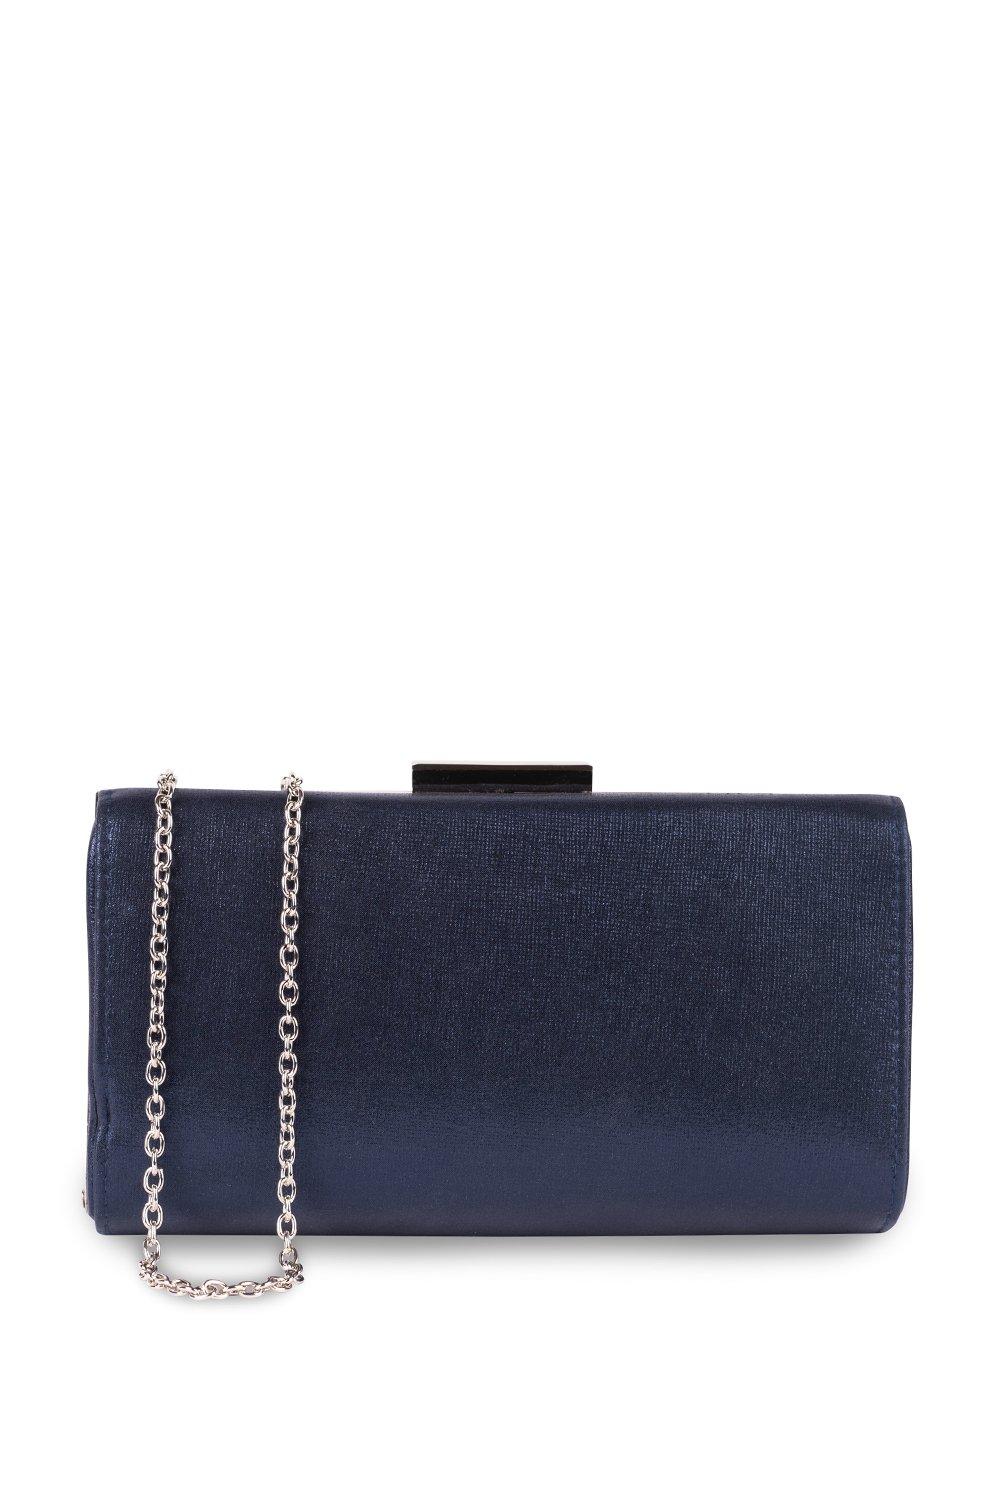 Womens Accessories Purses | Oasis